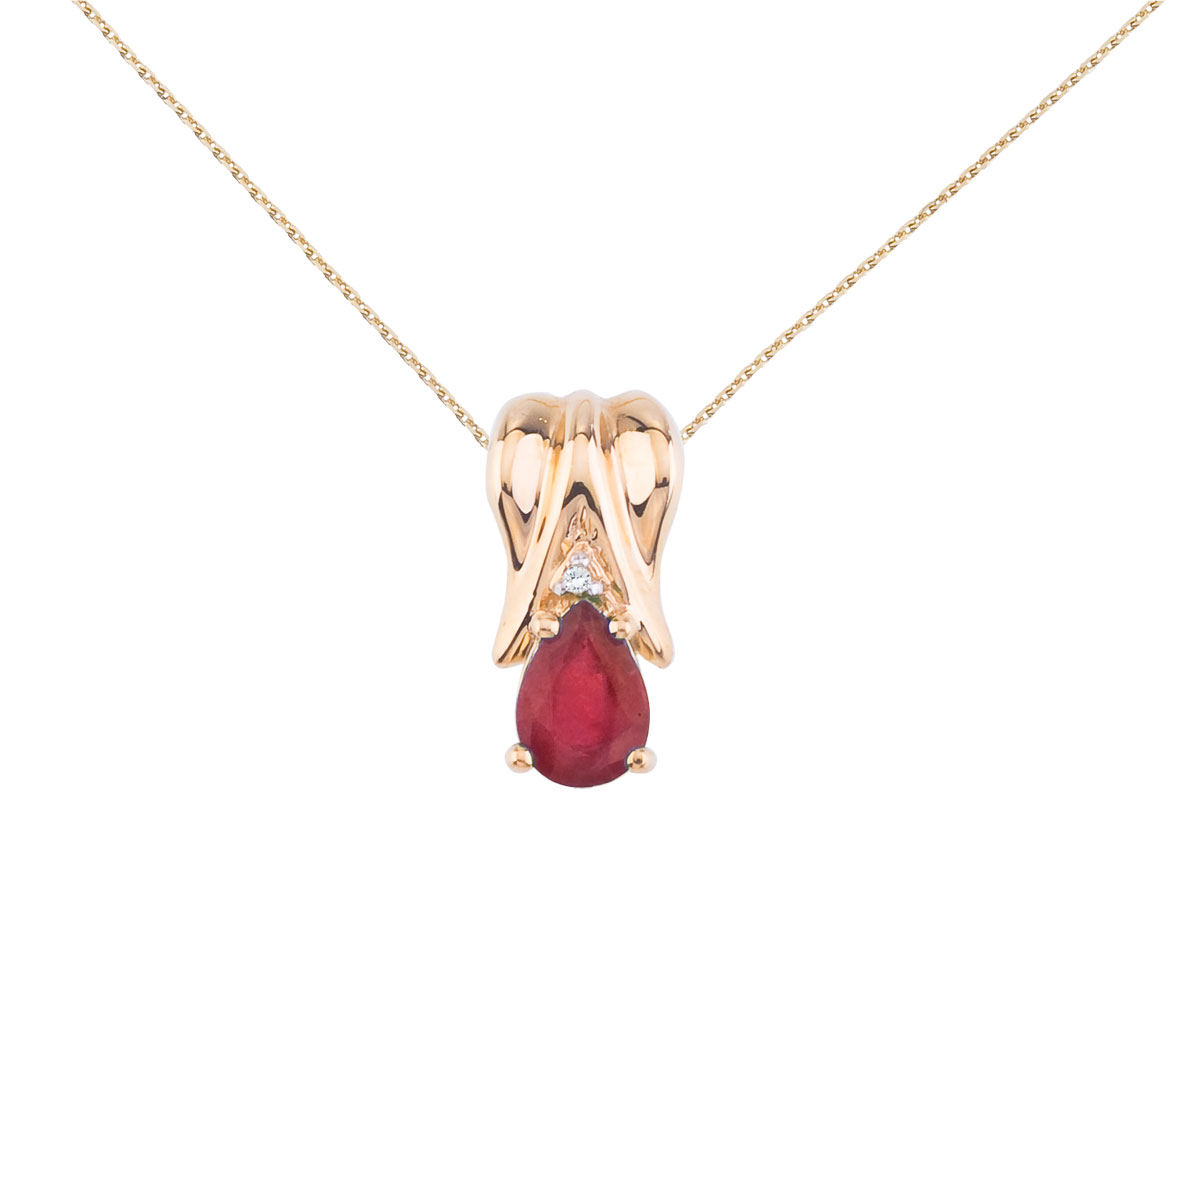 7x5 mm natural ruby diamond accented pendant in 14k white gold.